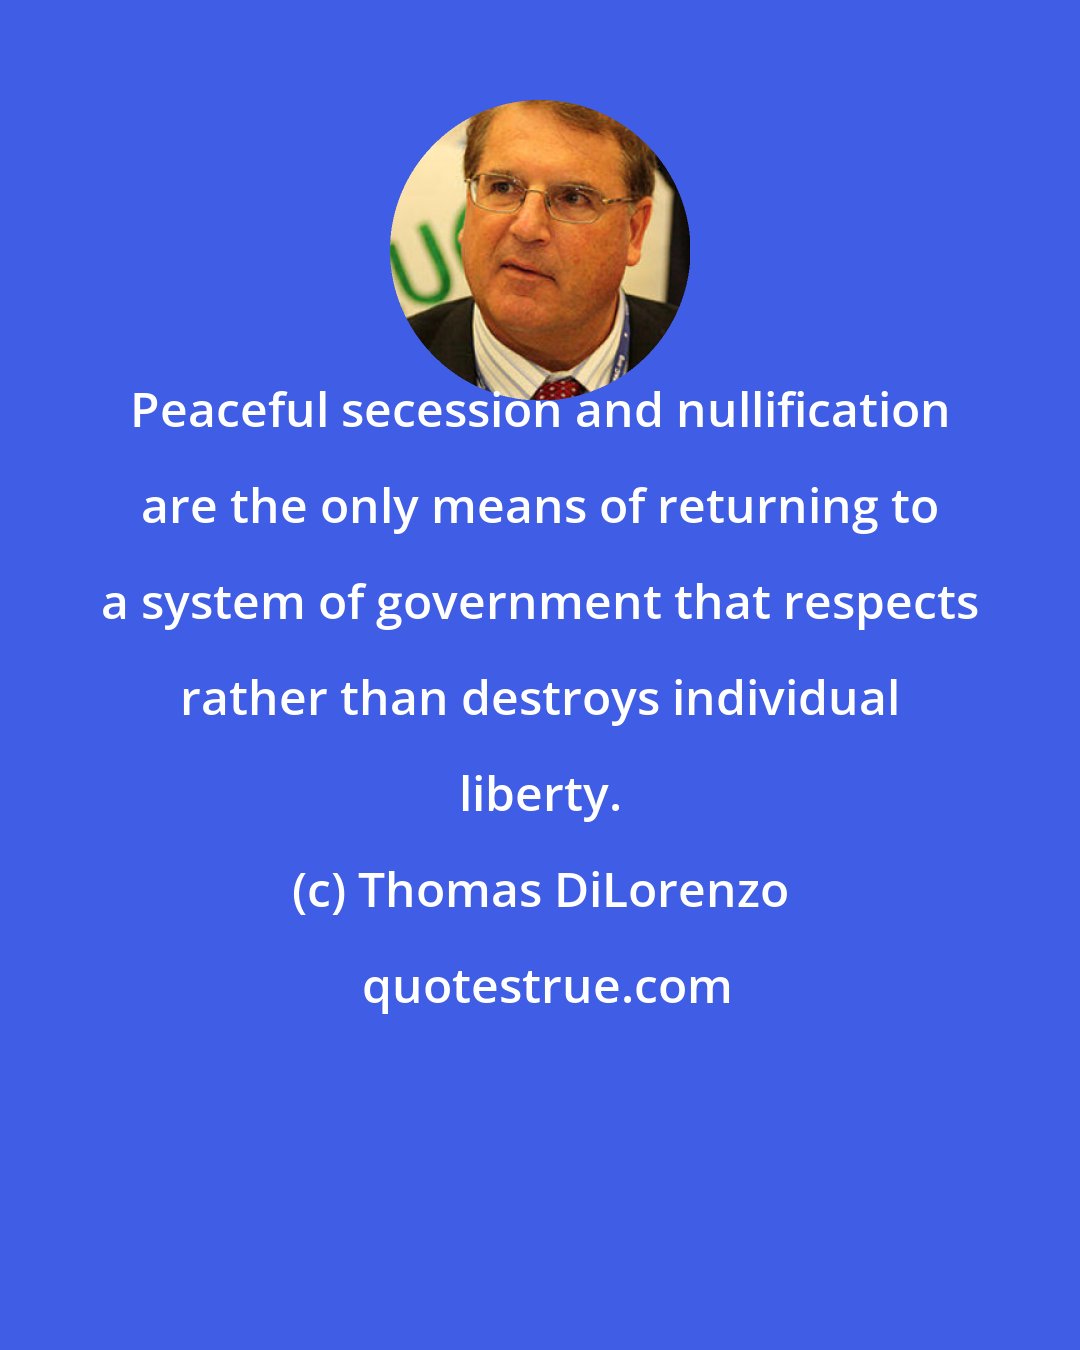 Thomas DiLorenzo: Peaceful secession and nullification are the only means of returning to a system of government that respects rather than destroys individual liberty.